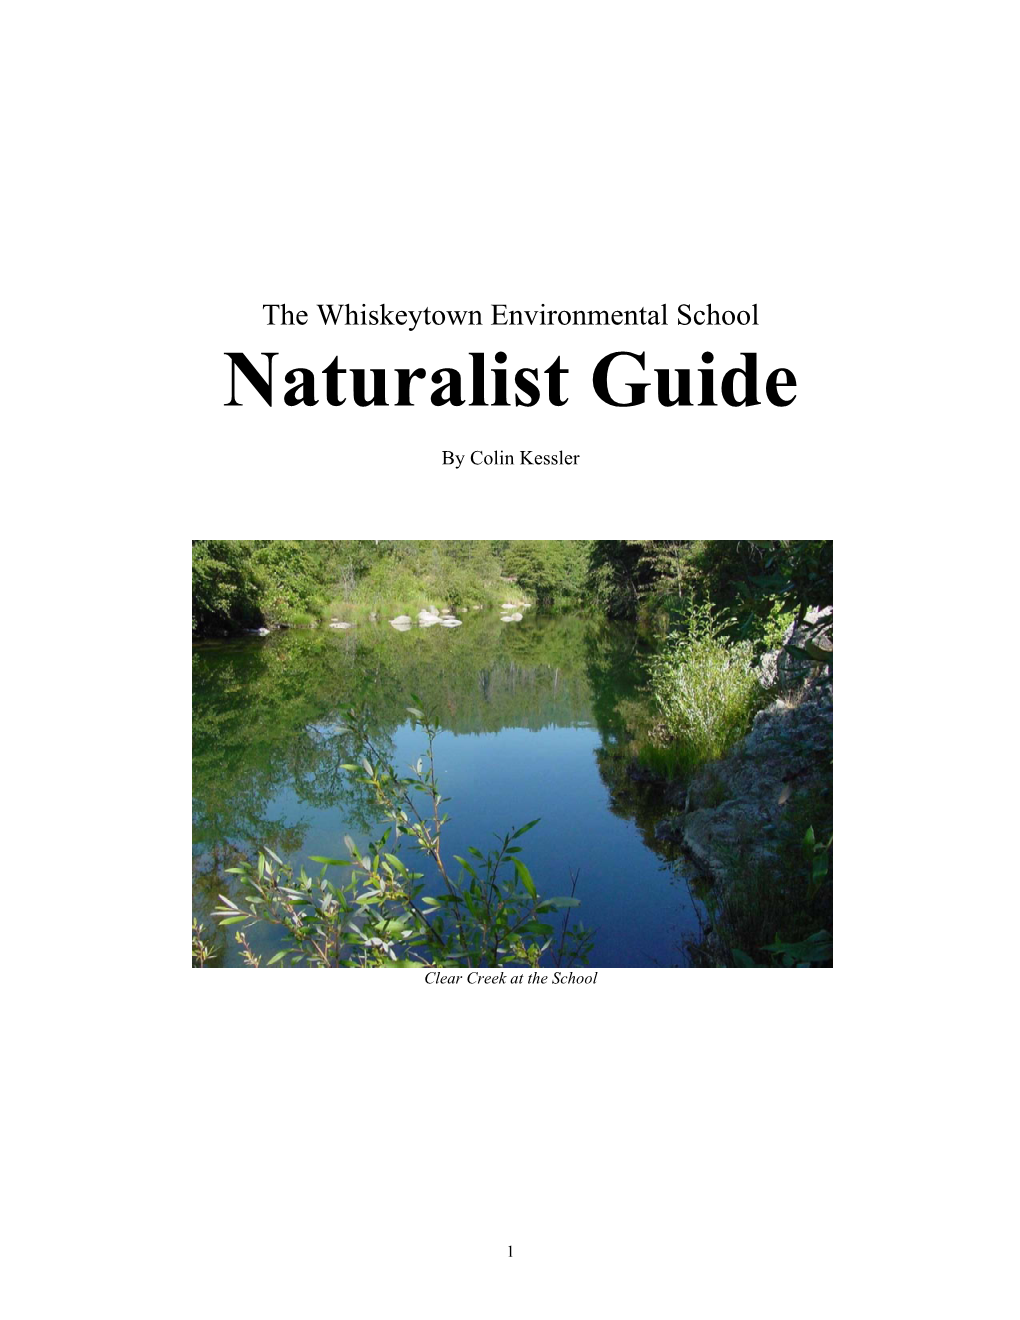 The Whiskeytown Environmental School Naturalist Guide